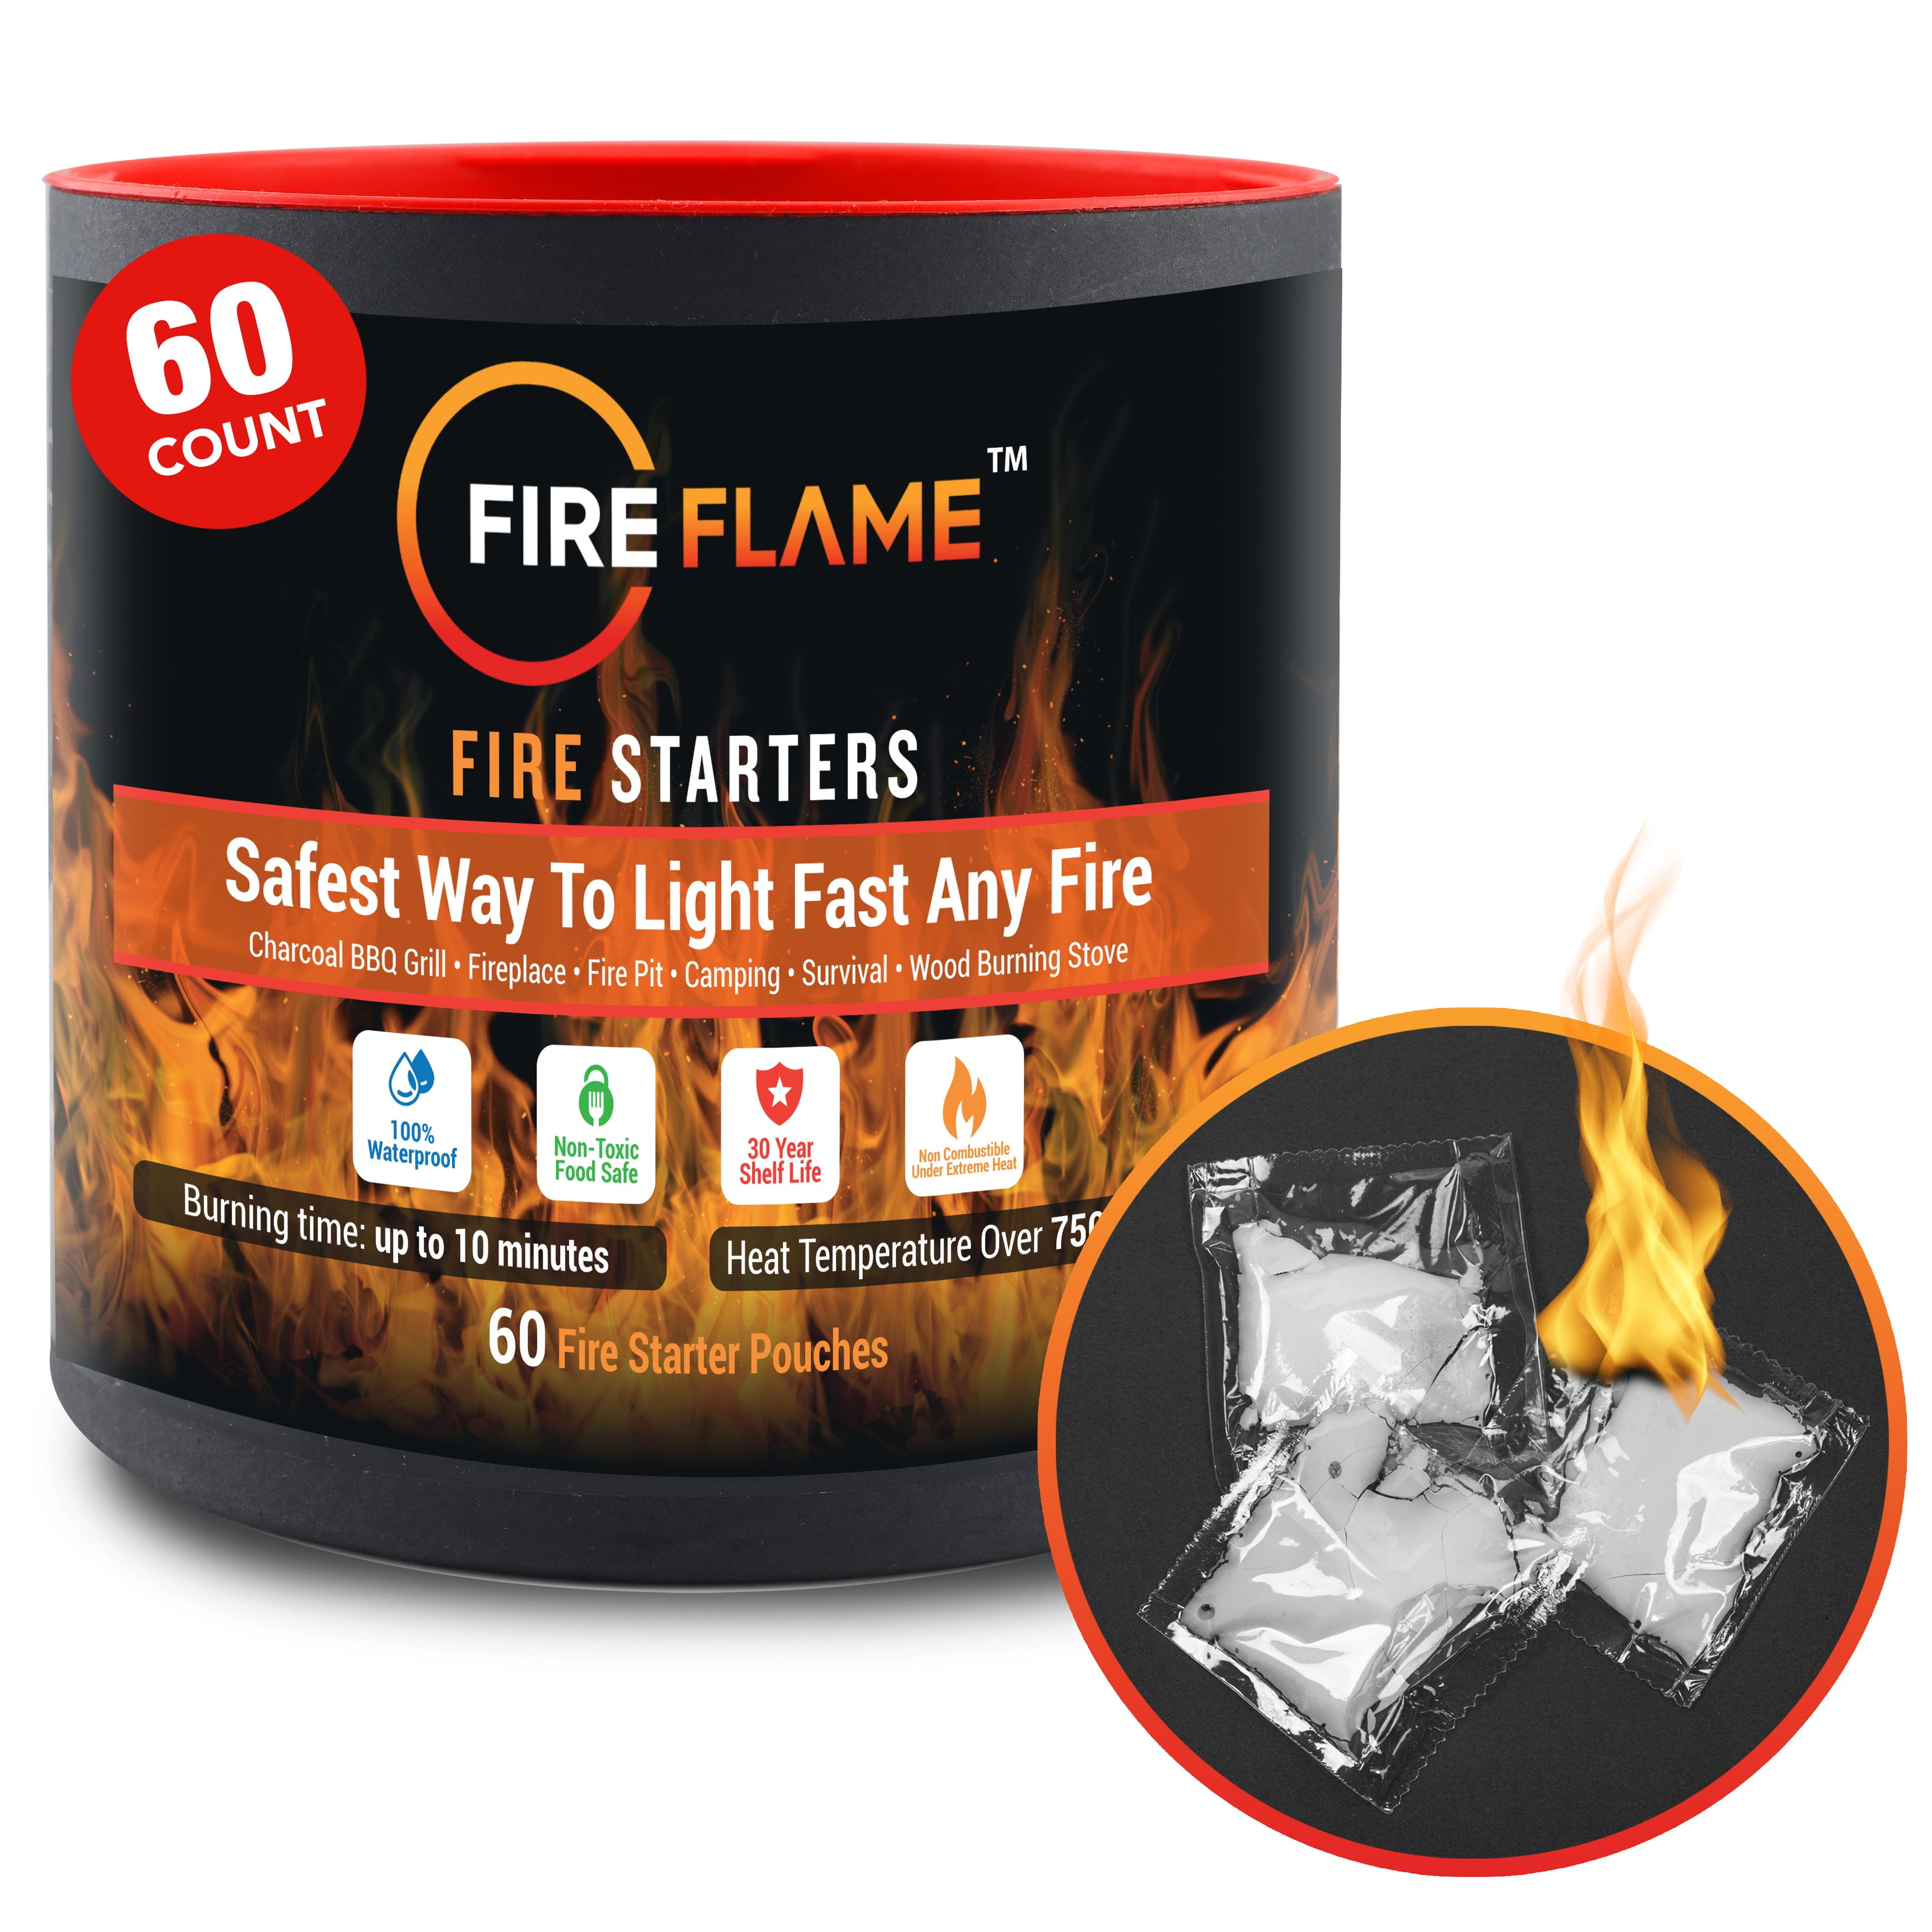 Fire & Flavor Charcoal Starter Clean Burn All Natural Chemical-Free 